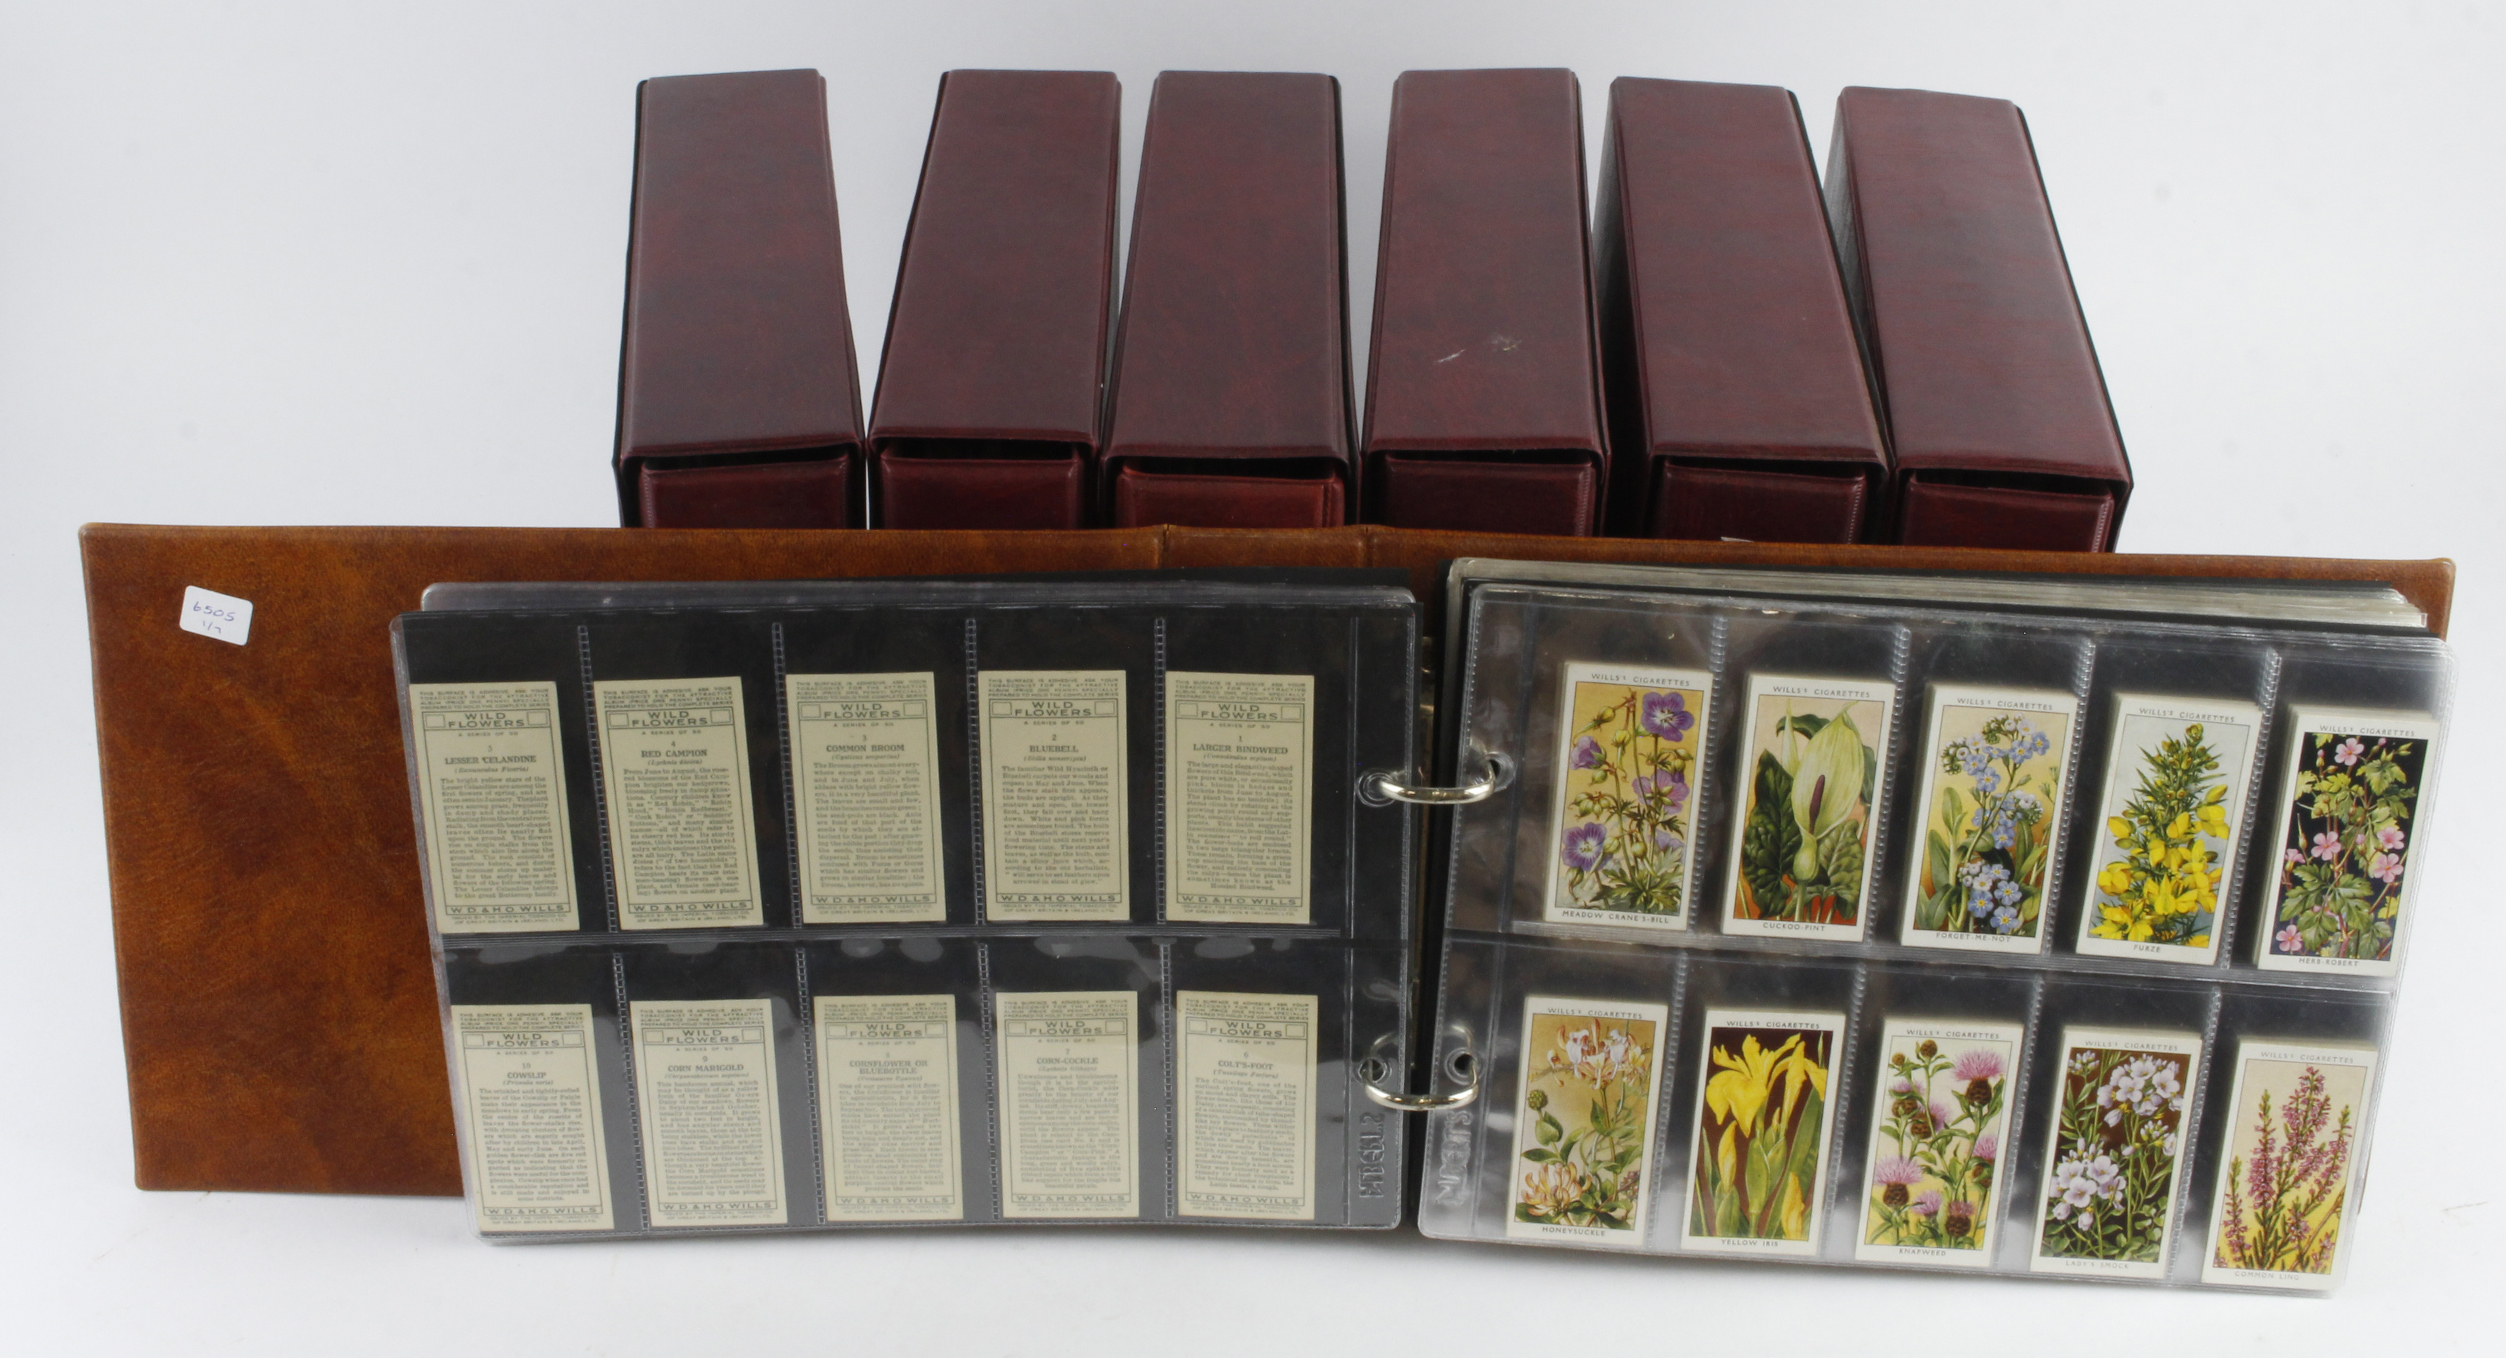 Collection of approx 67 complete sets in pages in 7 modern albums, issuers include Cope, Players,